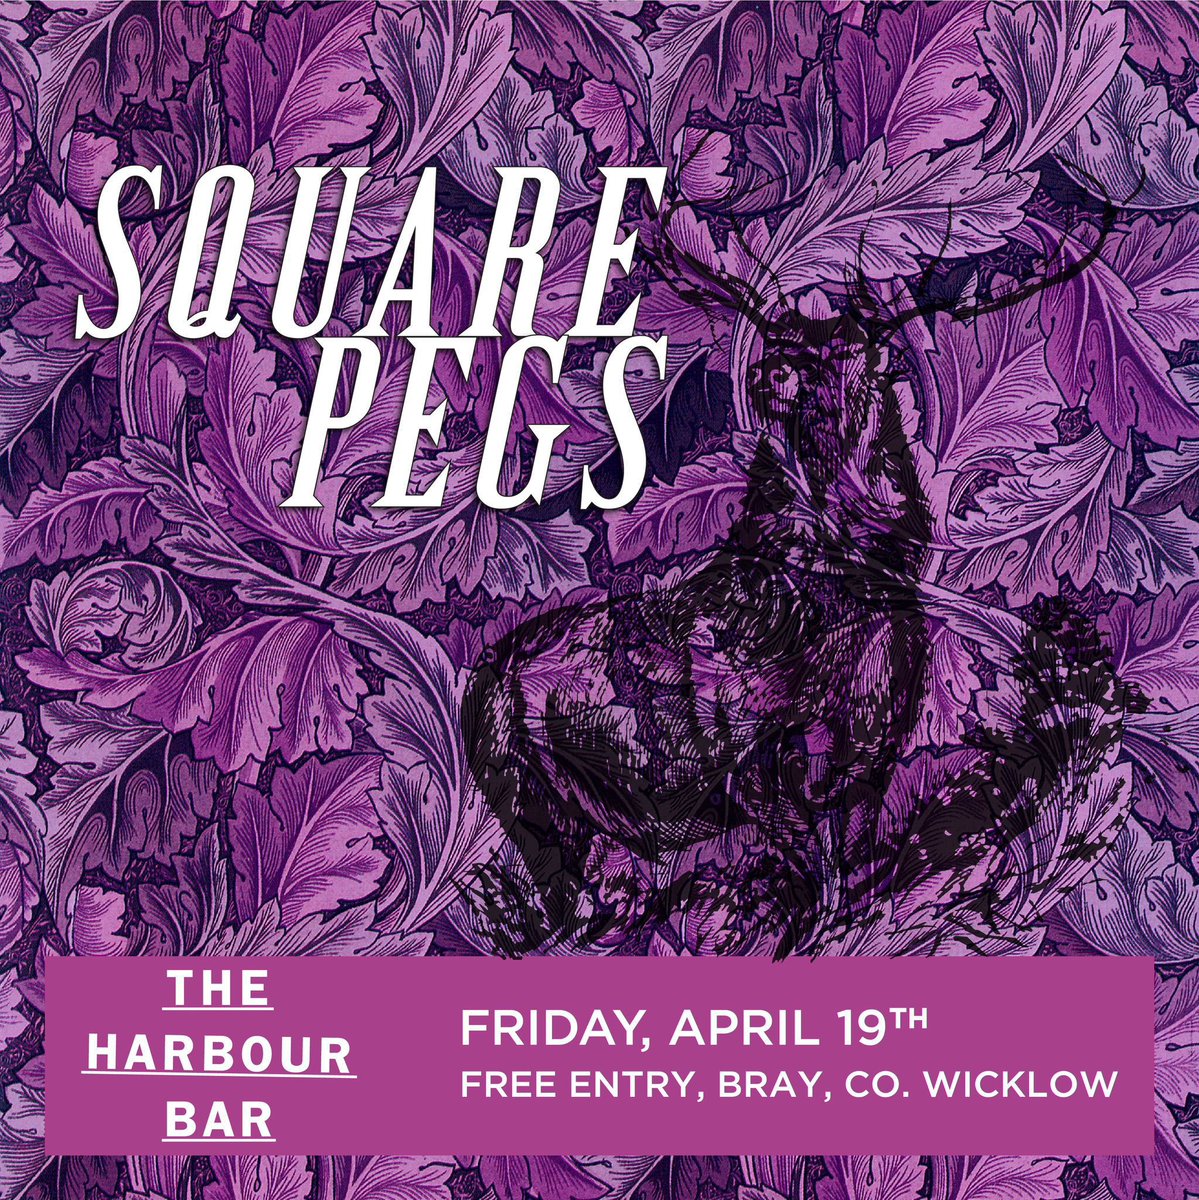 We’ll be kicking out the jams this Friday from 9.30pm at @theharbourbar in Bray. Free admission. Good time blues. @graham_hopkins @zamo_riffman